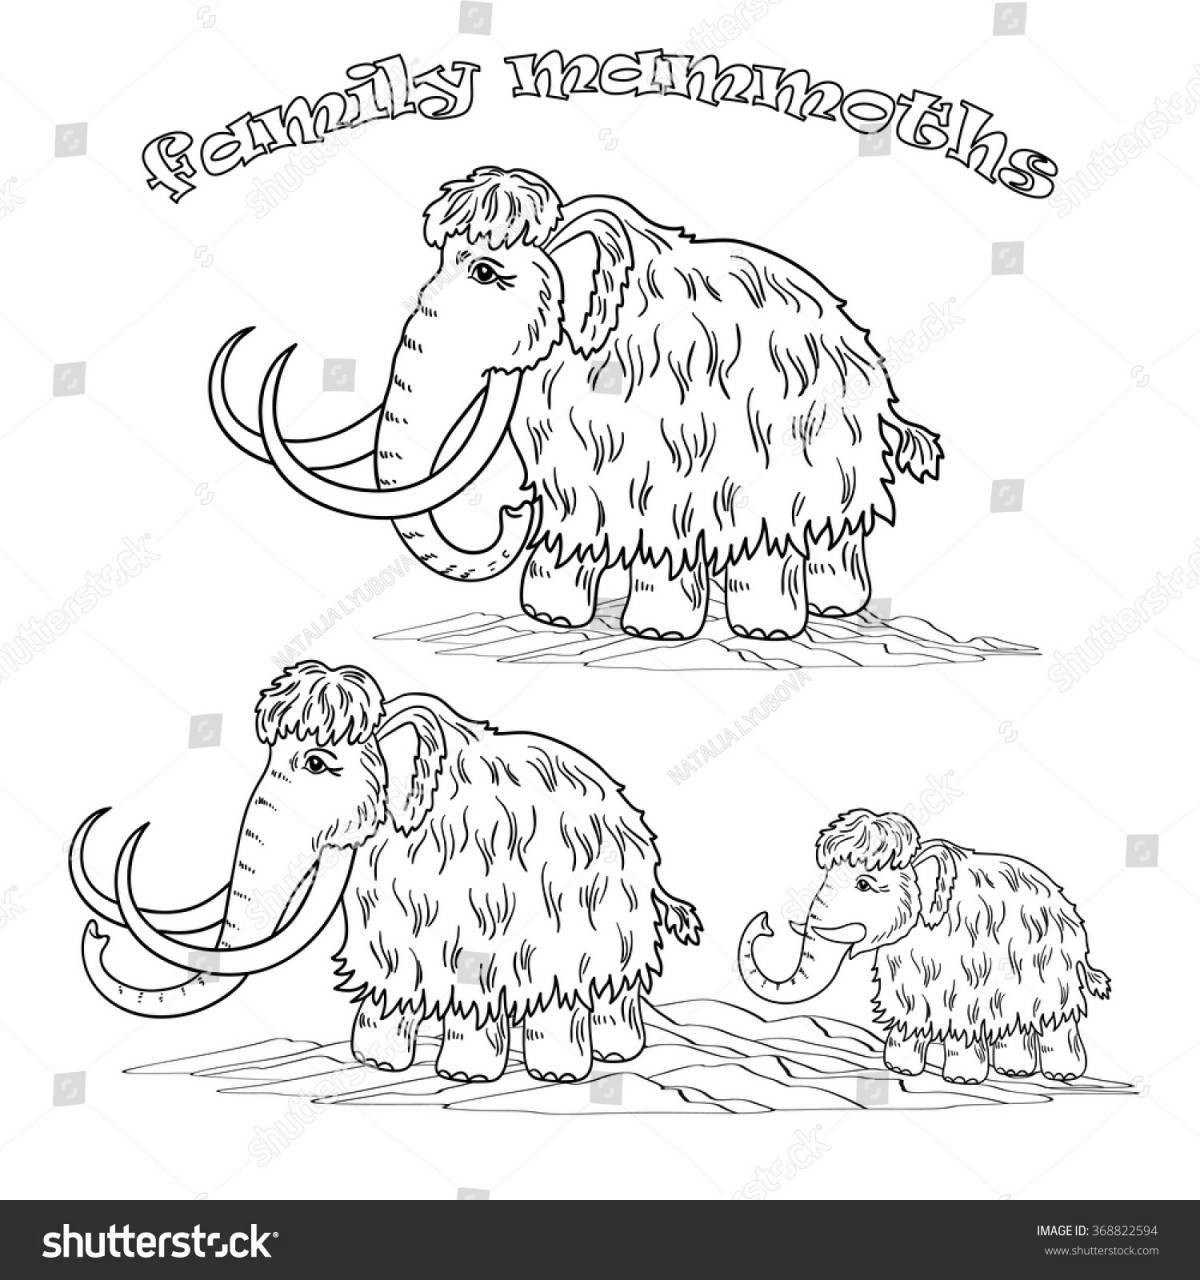 Mammoth creative coloring for kids